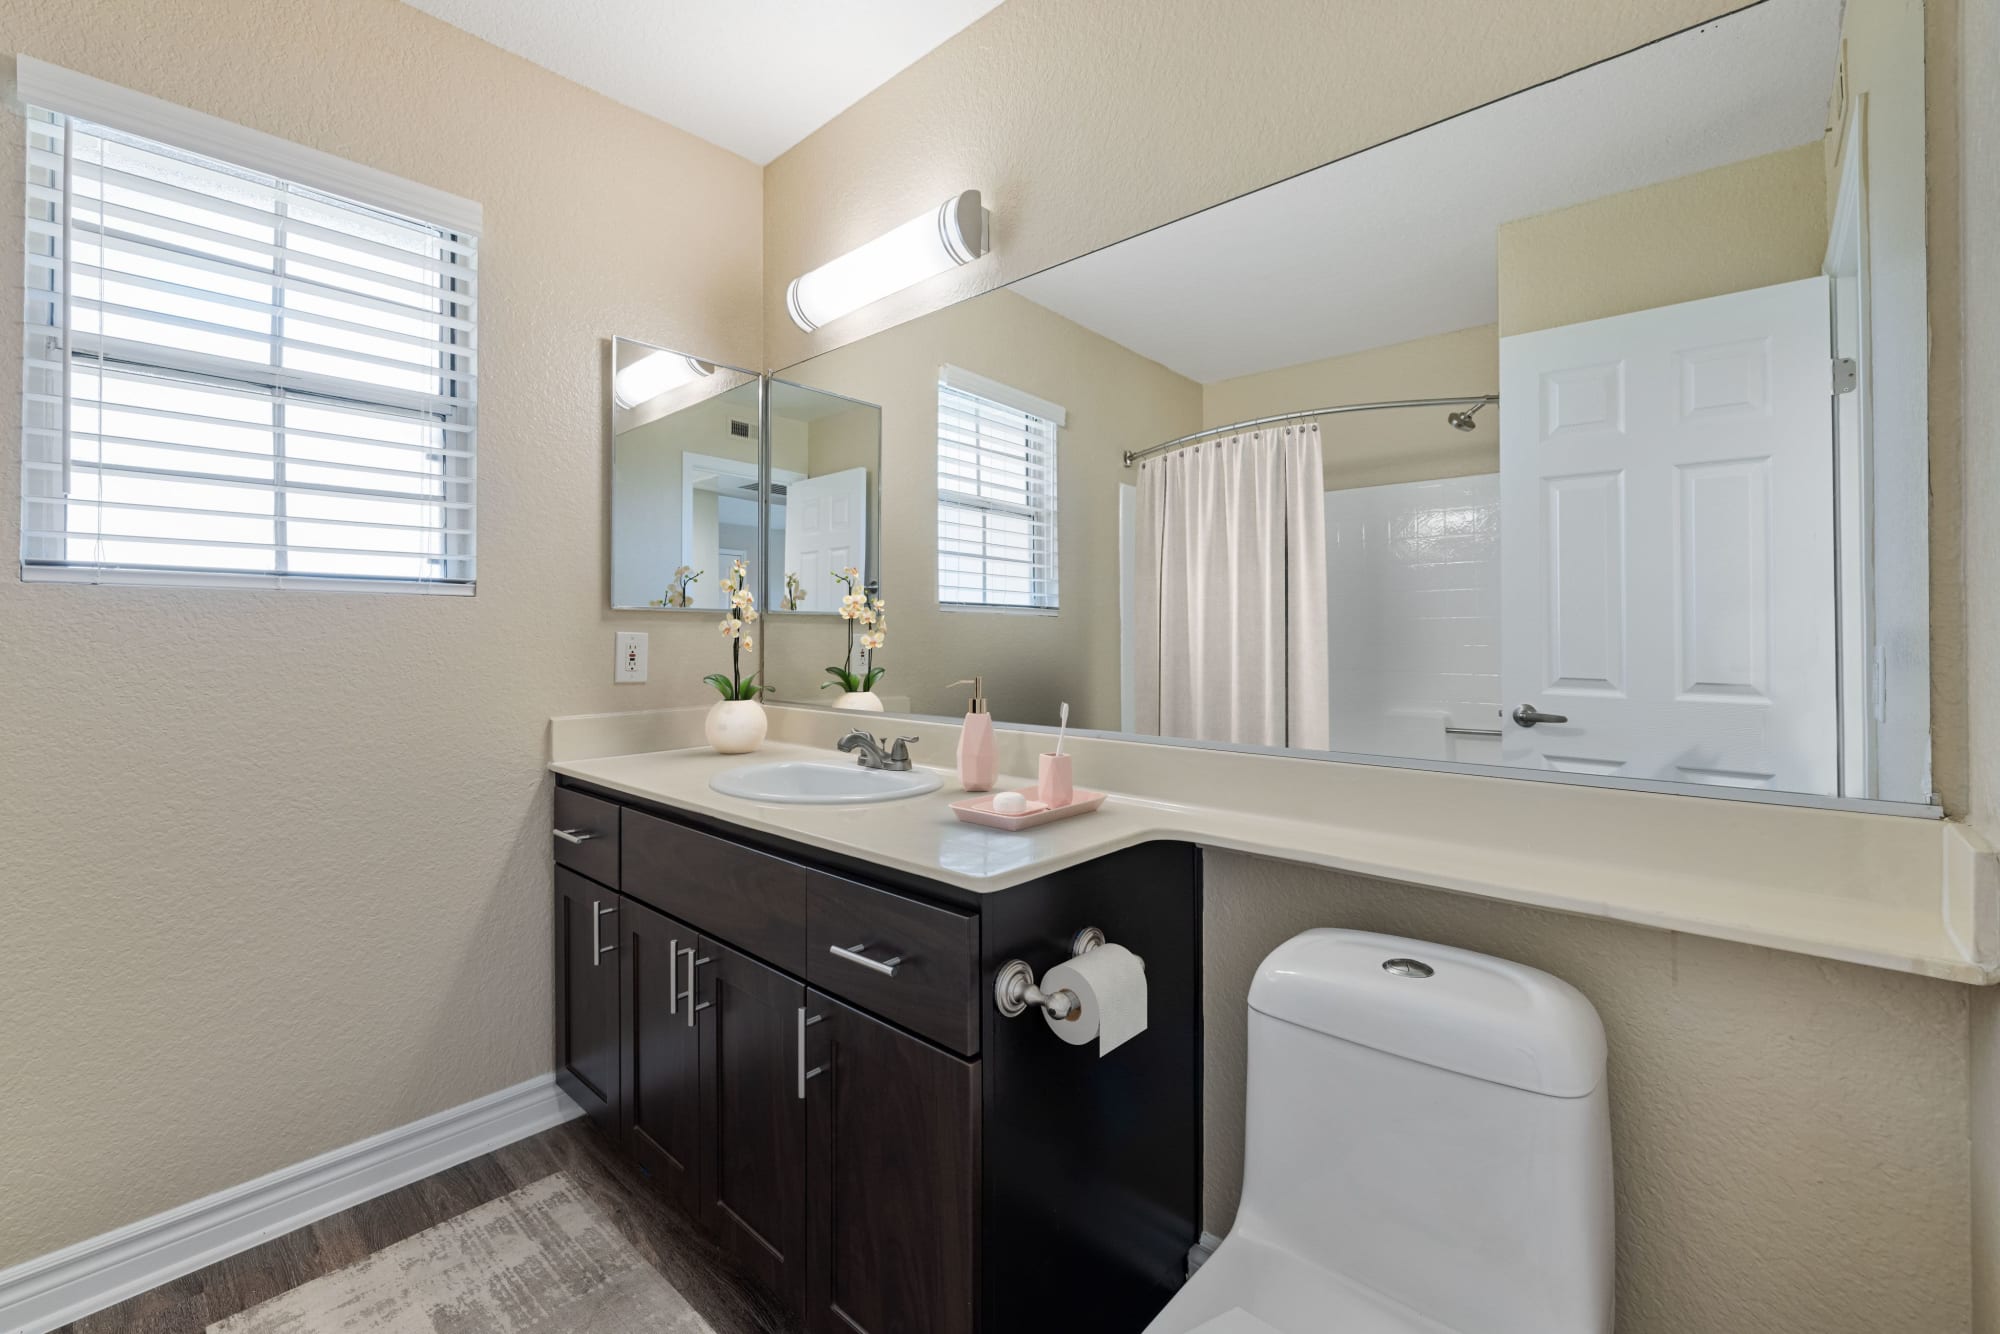 Spacious bathroom with a tub at Village Oaks in Chino Hills, California